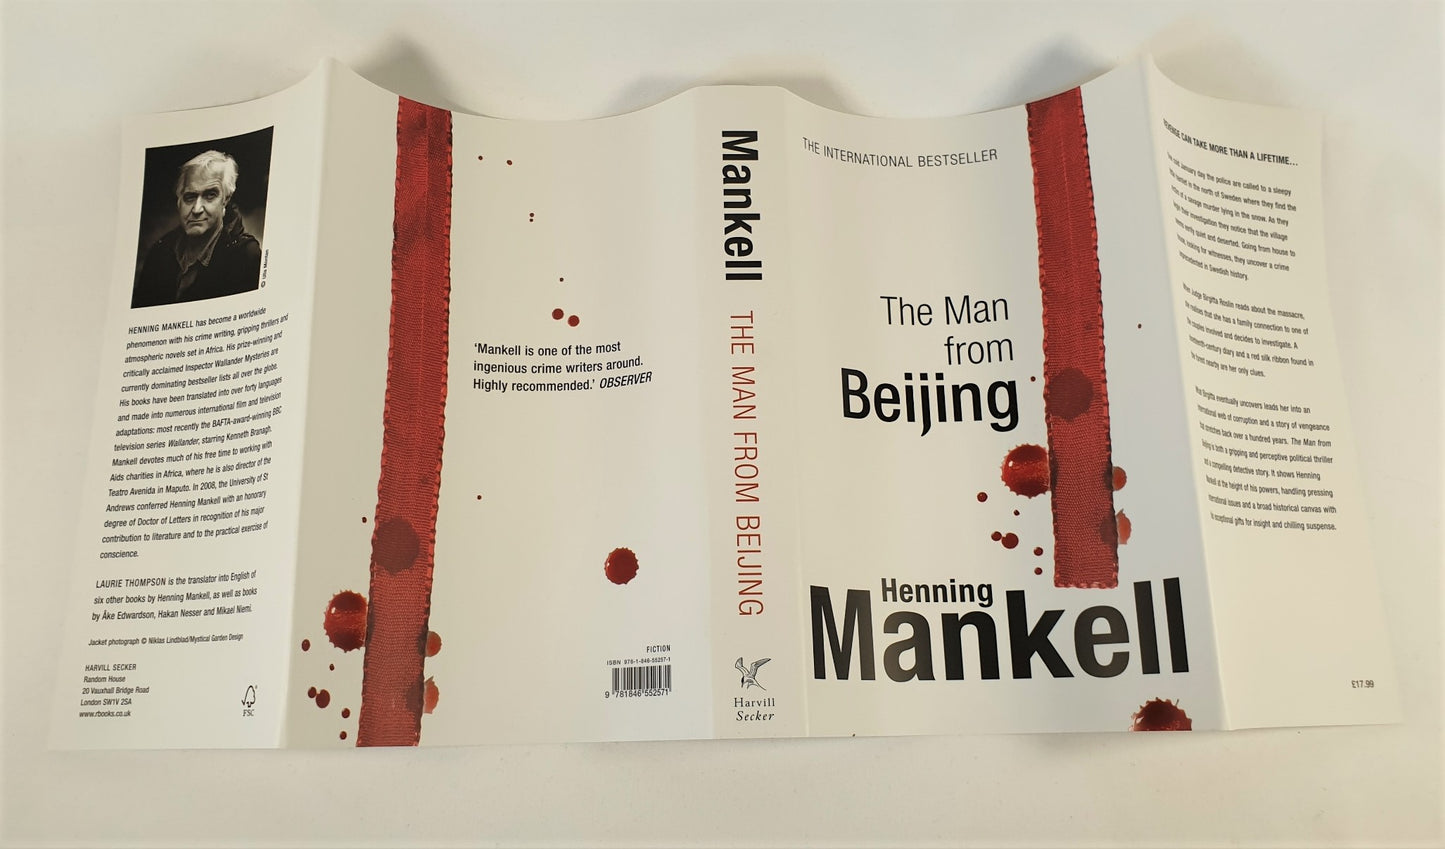 Mankell, Henning - The Man from Beijing (Signed)